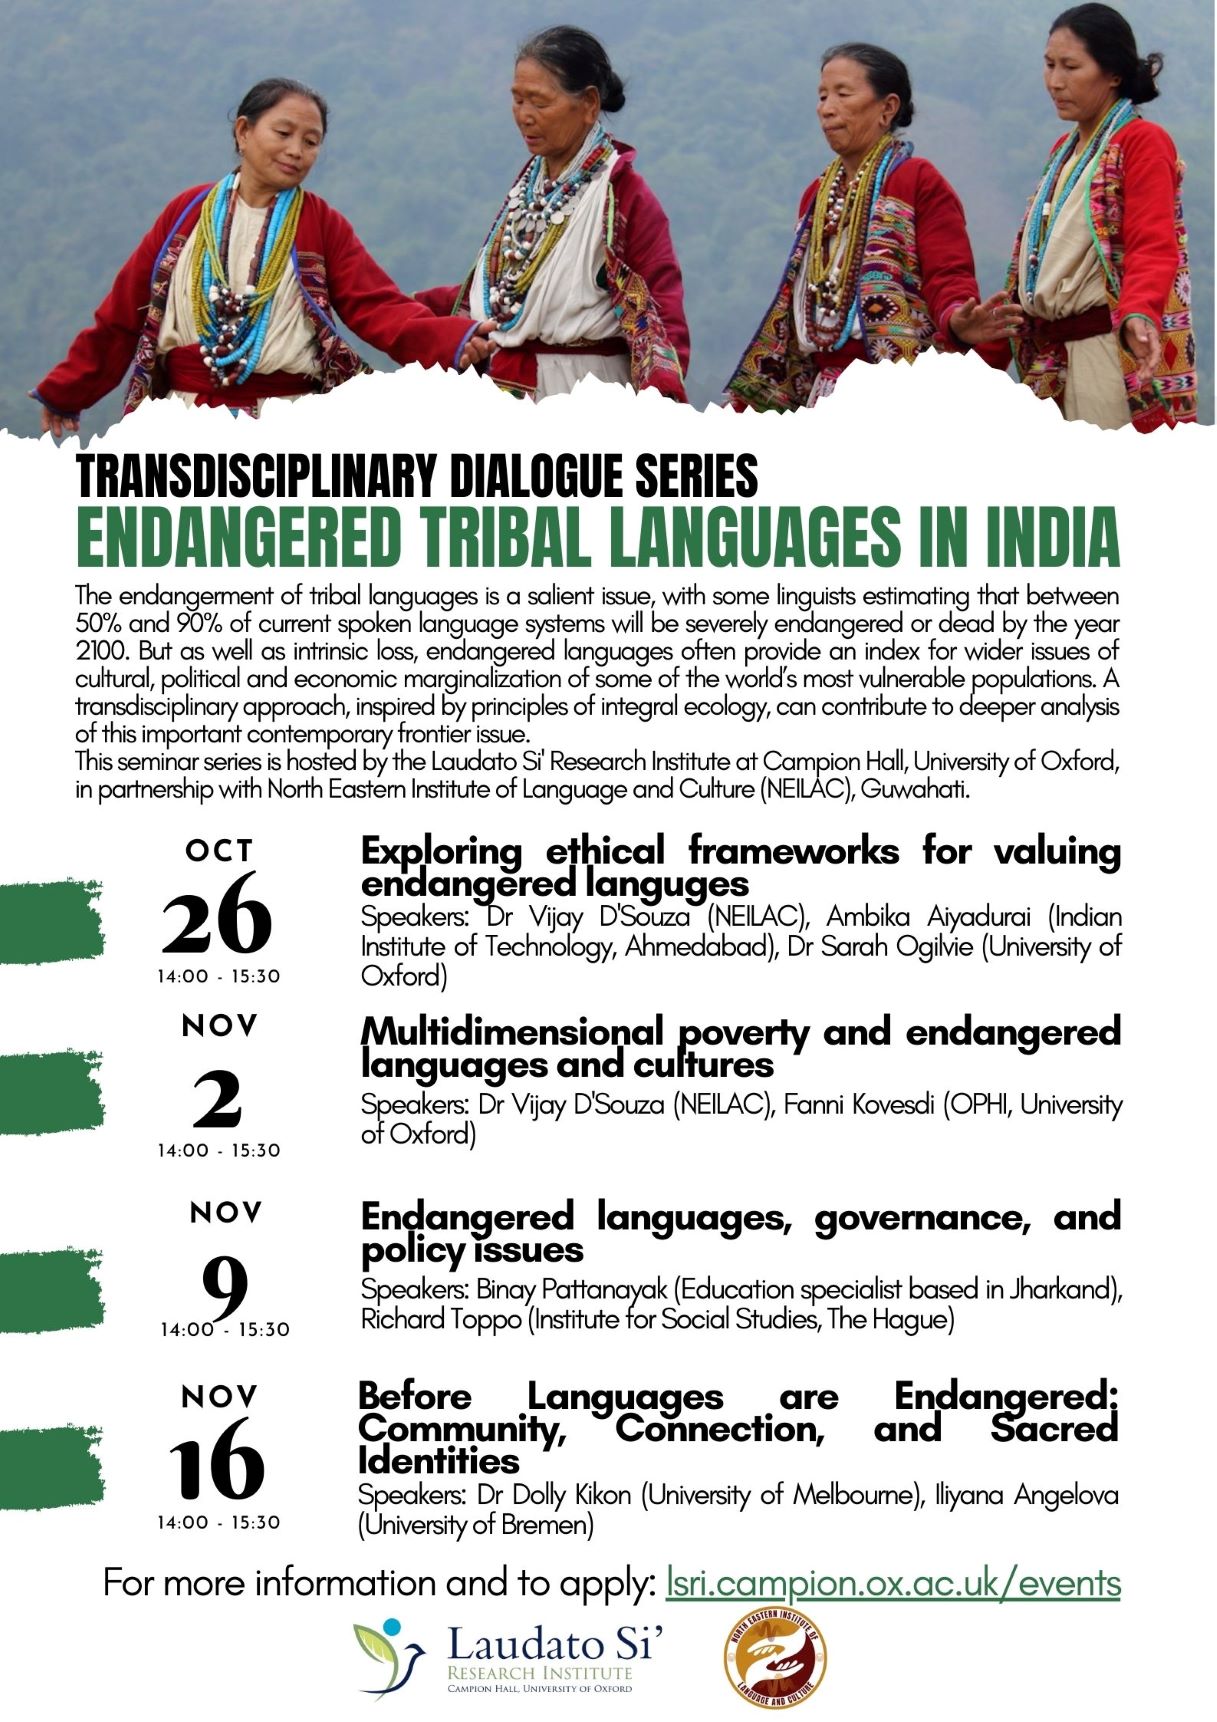 Poster for 'endangered tribal languages in India' seminar series